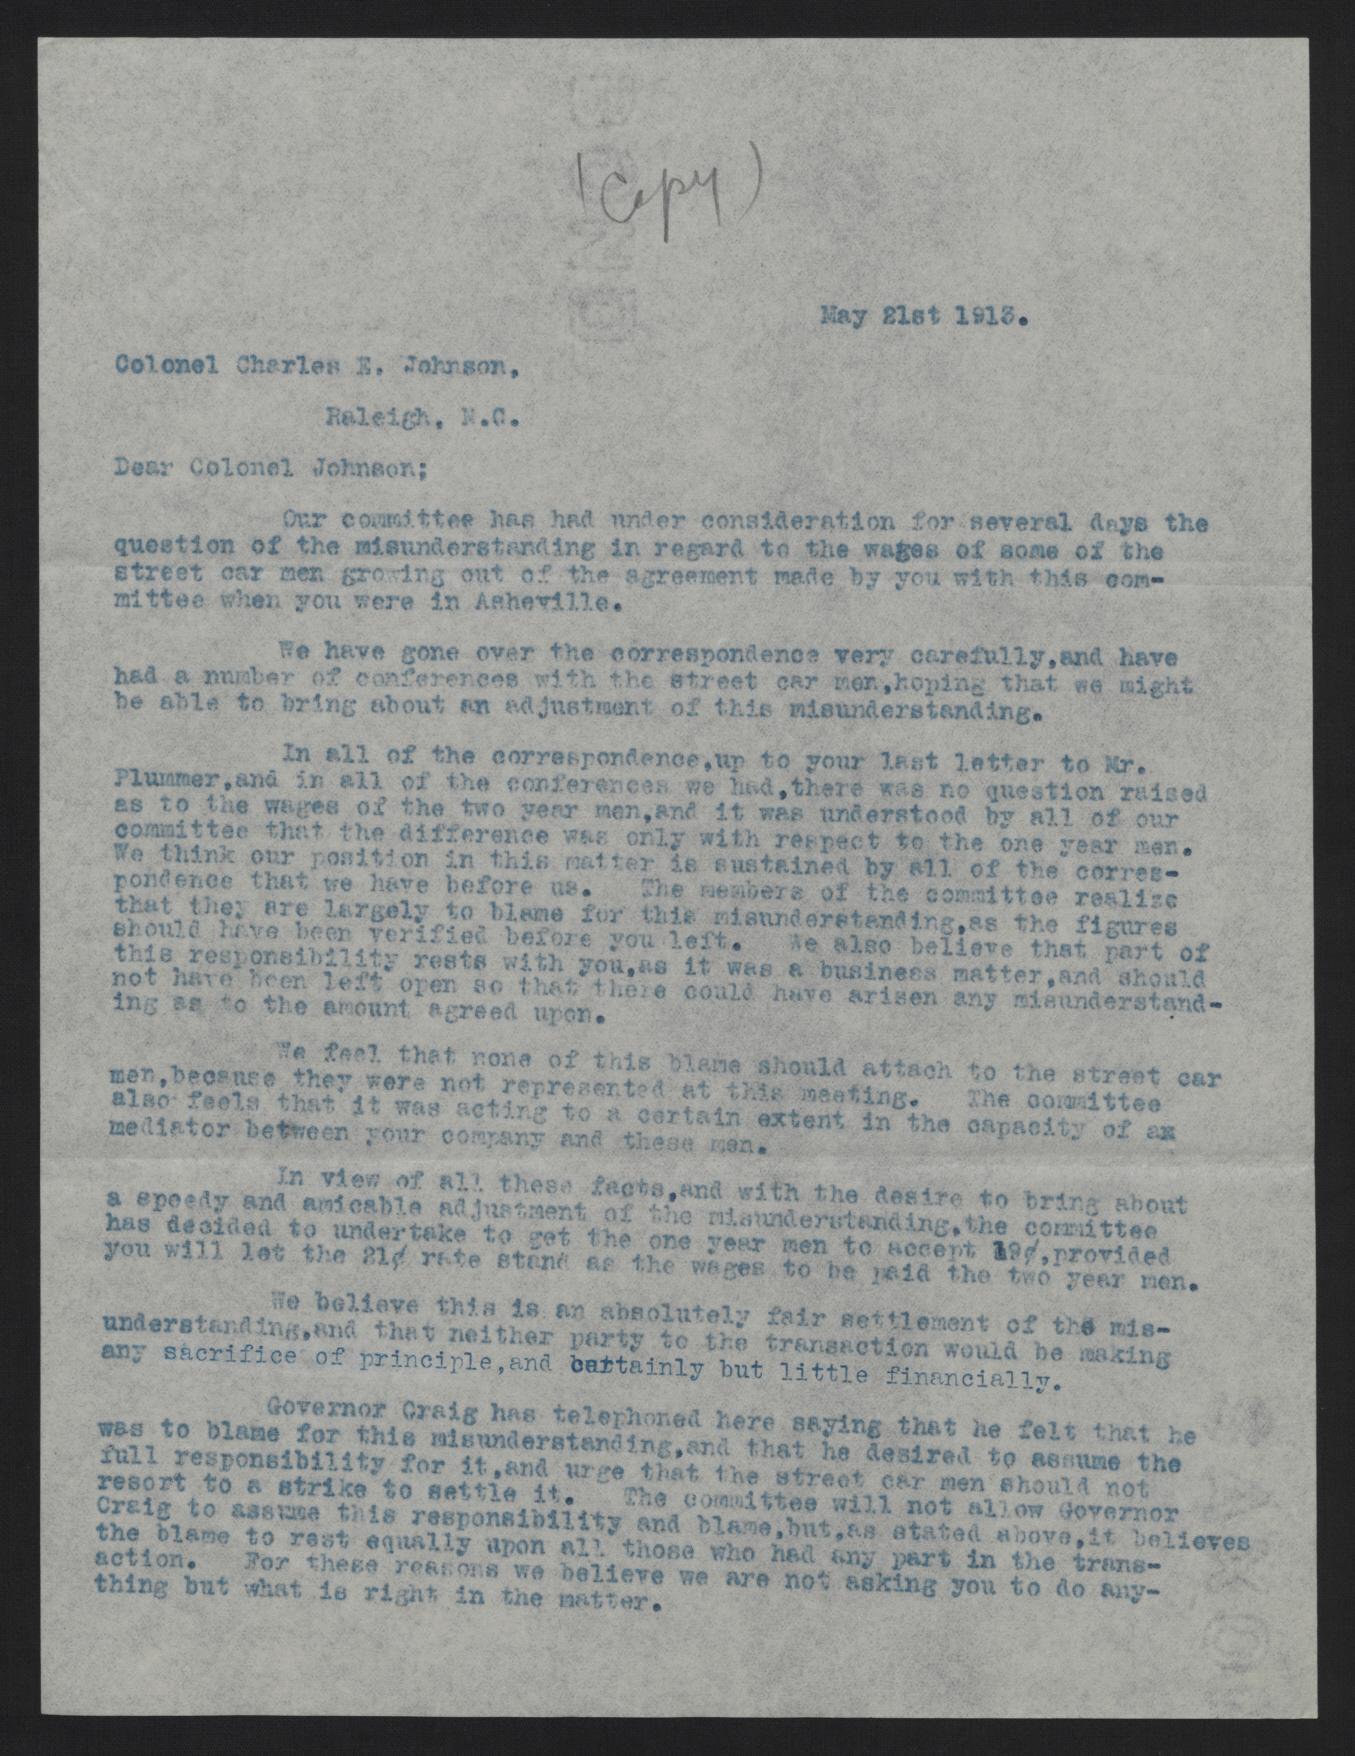 Letter from Powell to Johnston, May 21, 1913